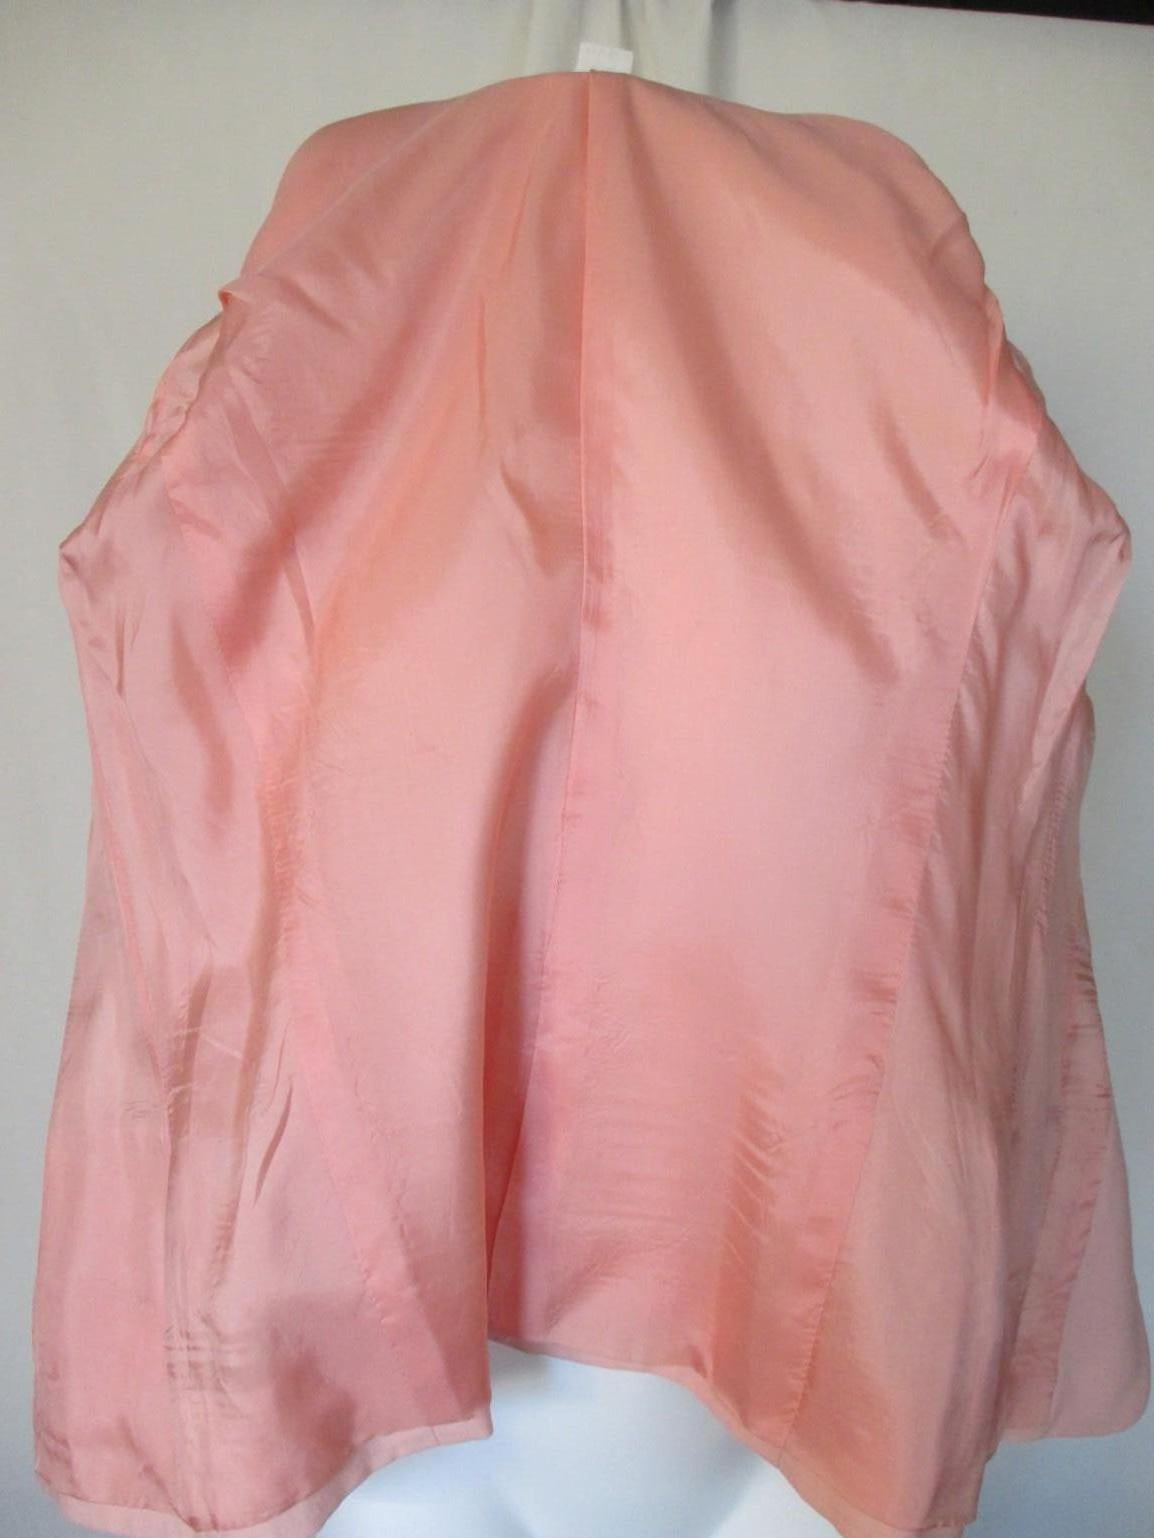 Documented Gianni Versace Couture 1992 Runway Jacket with Bows For Sale 2